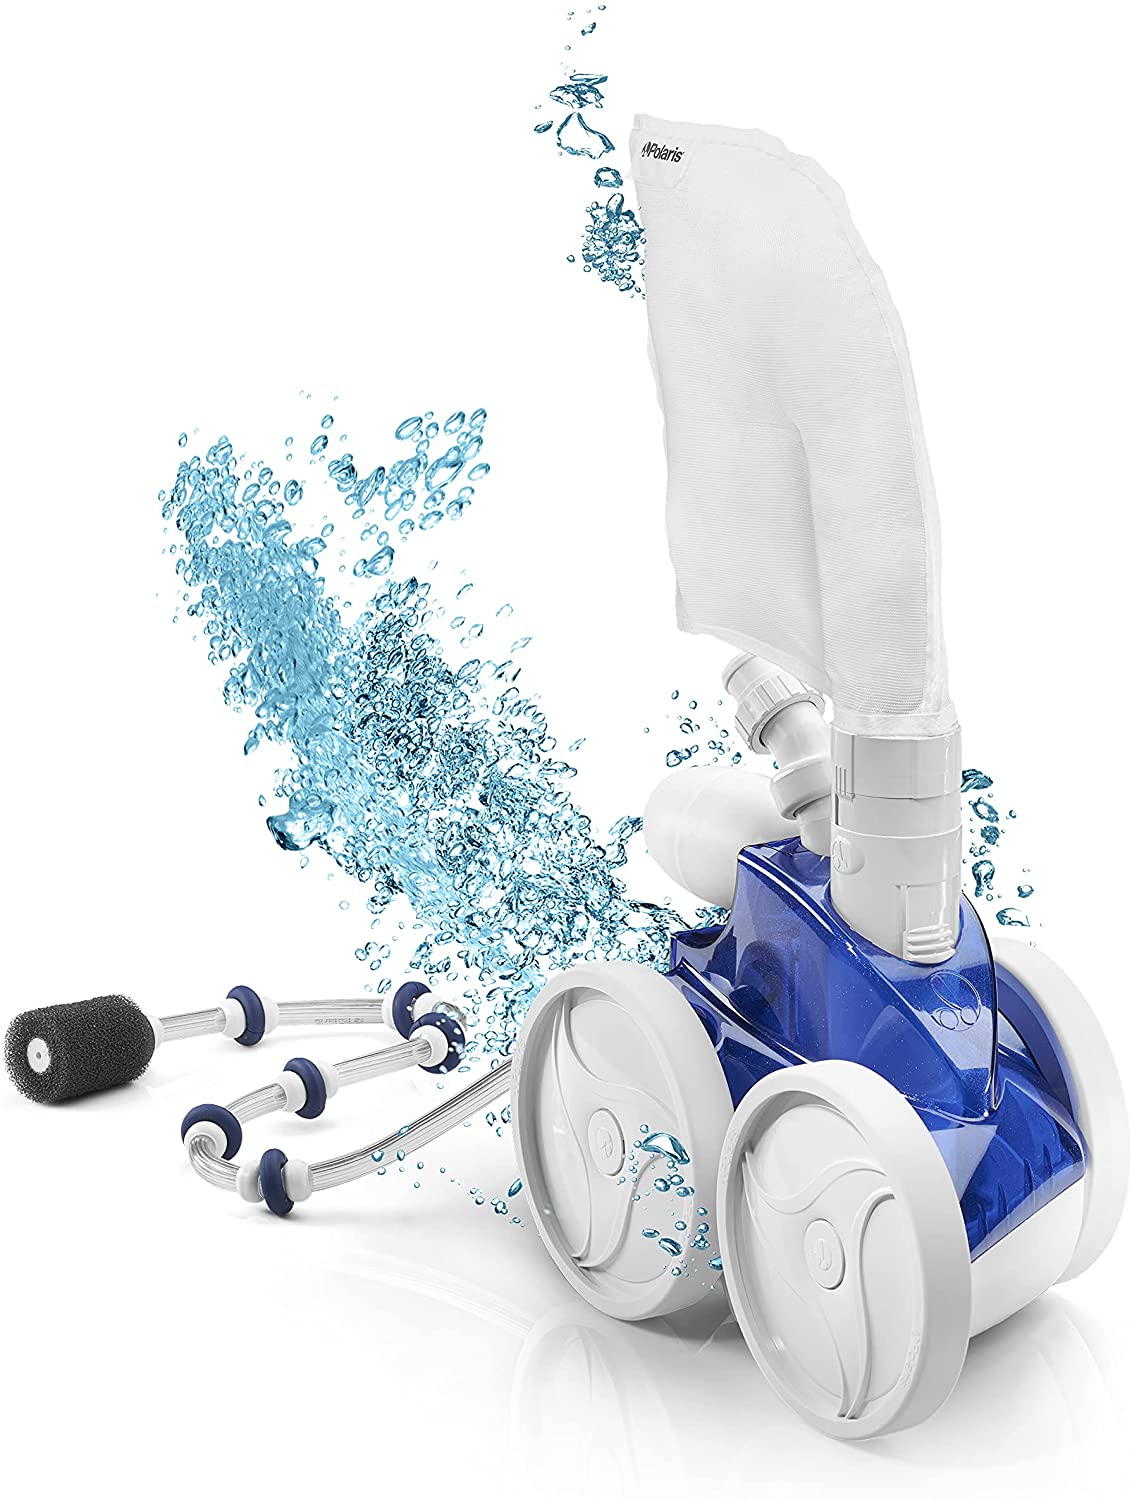 Polaris Vac-Sweep 360 In-Ground Multi-Surface Pool Cleaner